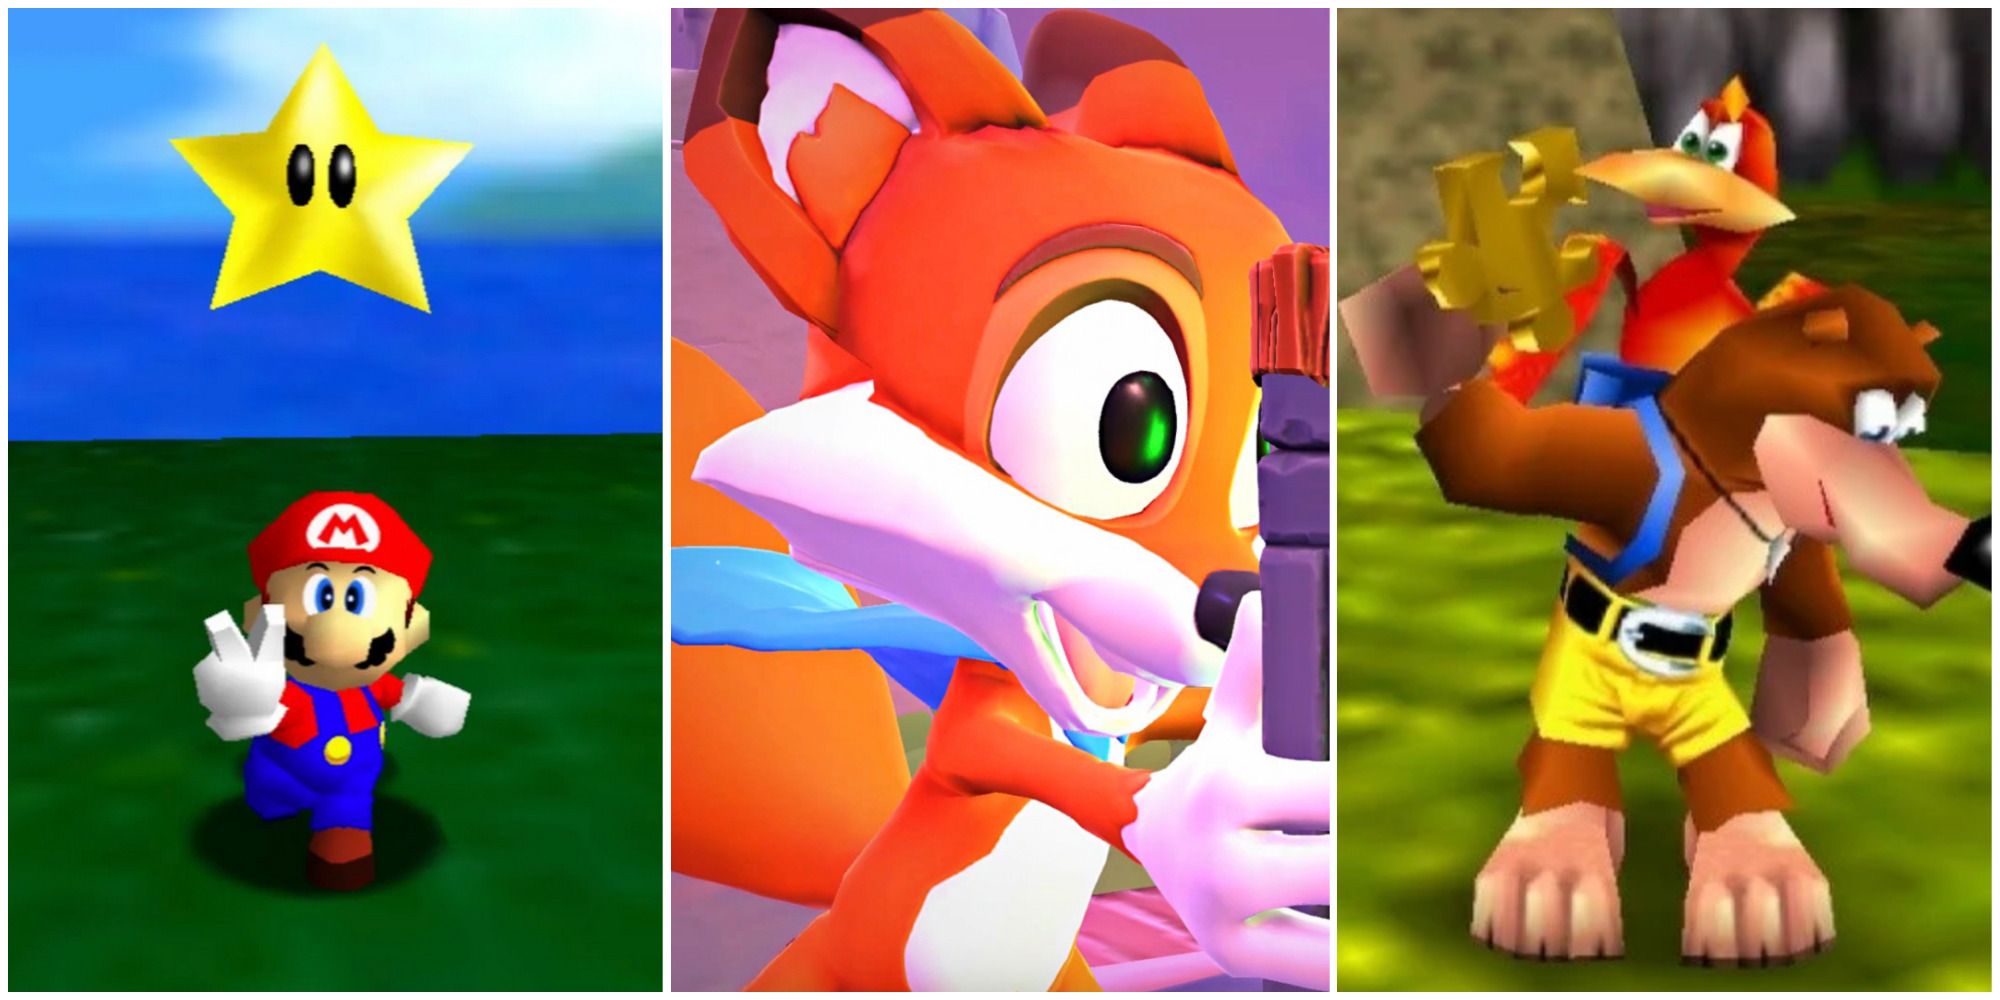 mario 64 mario and star, lucky from super lucky's tale, banjo and kazooie featured